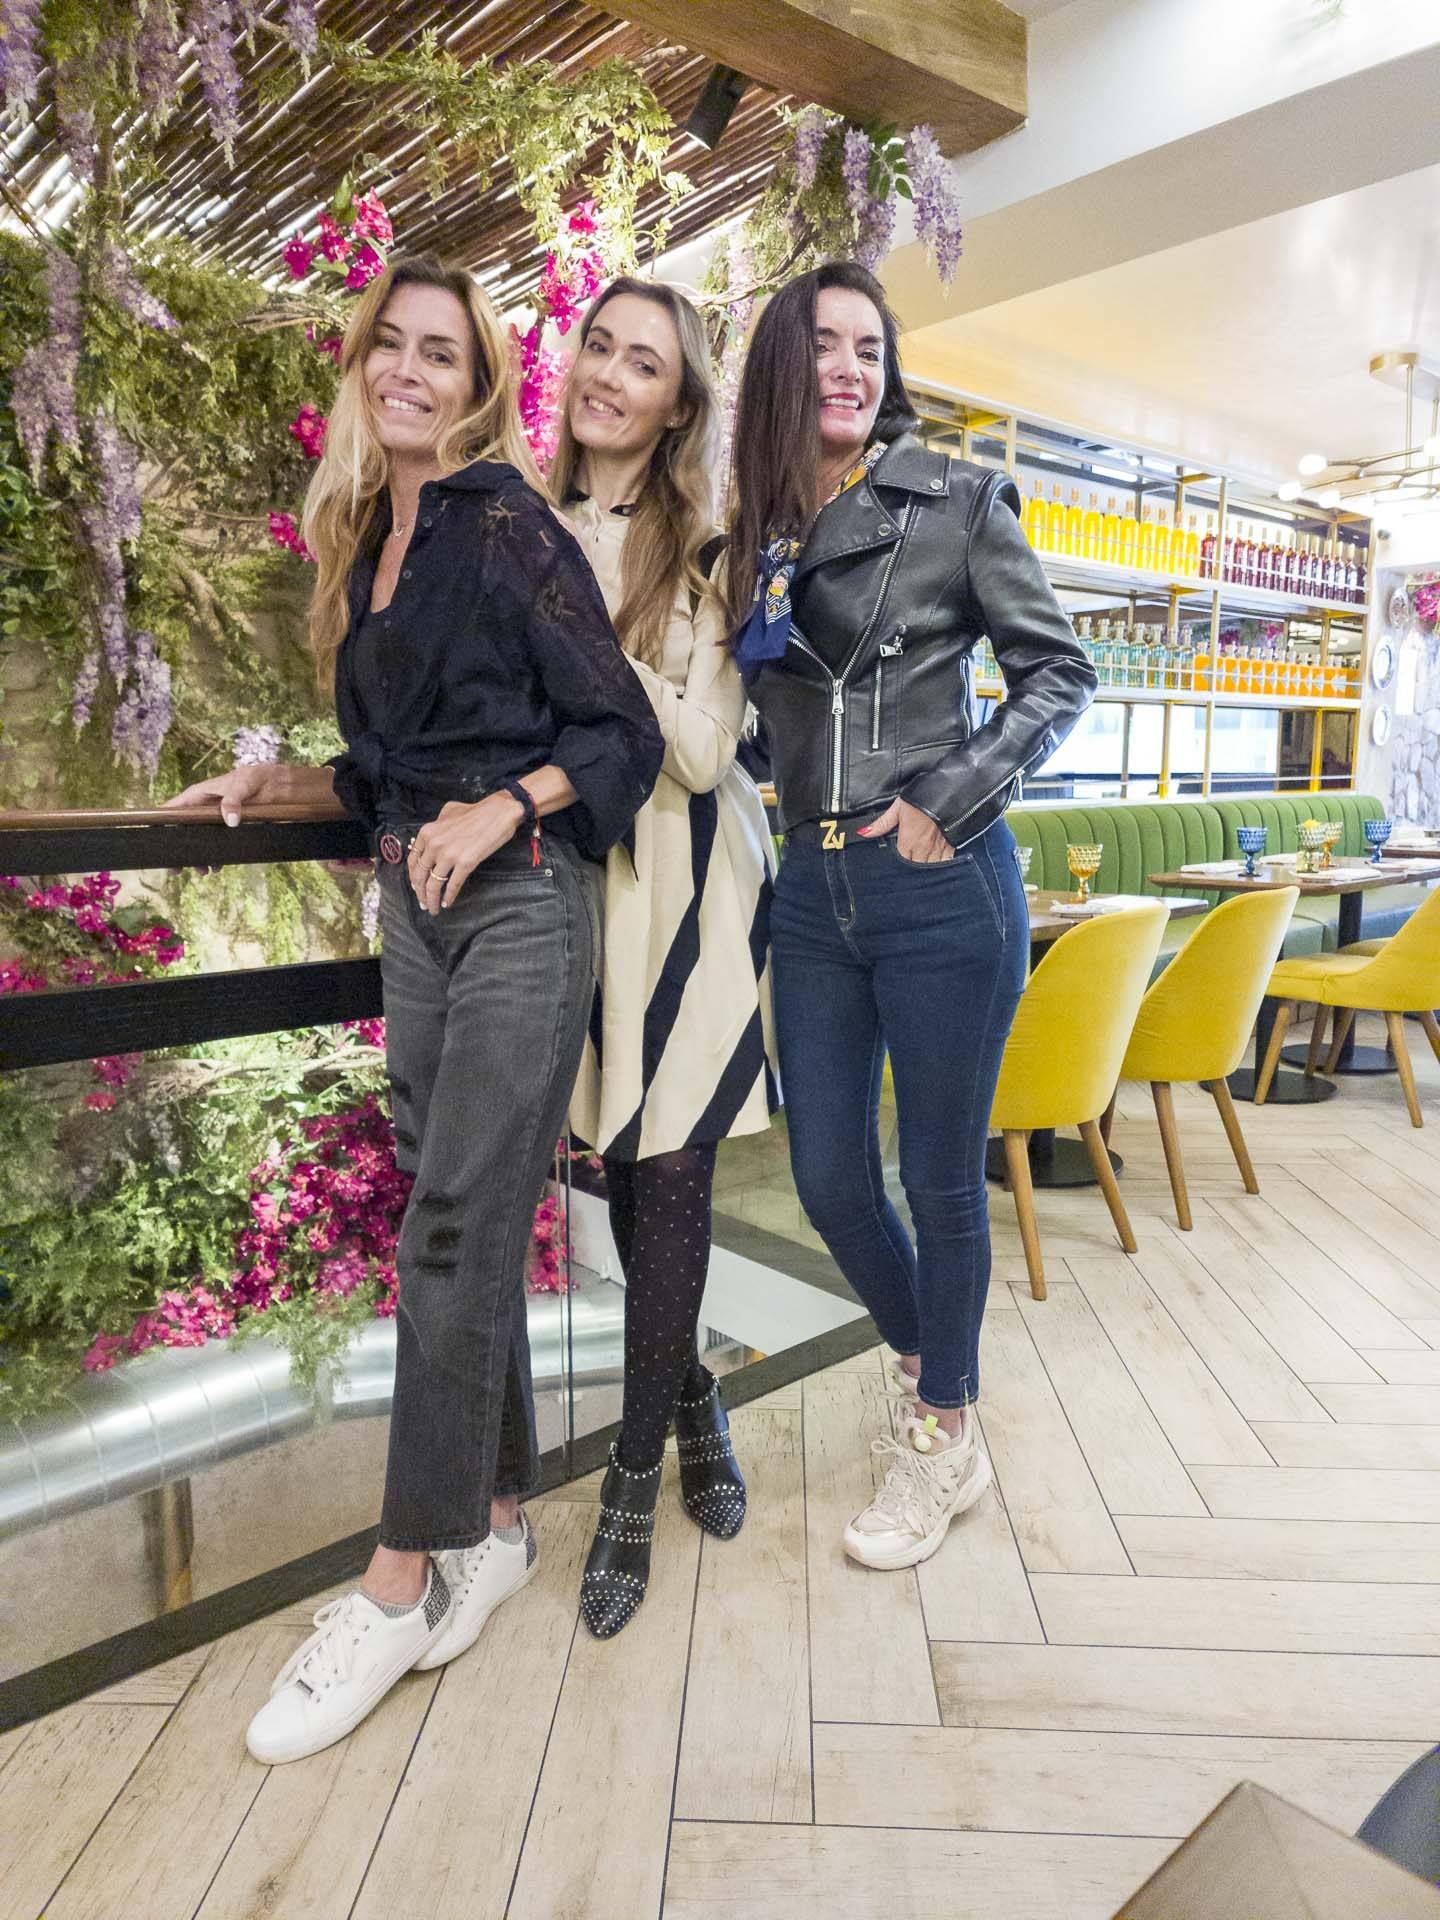 an image of three women standing in front of flowers at a cafe